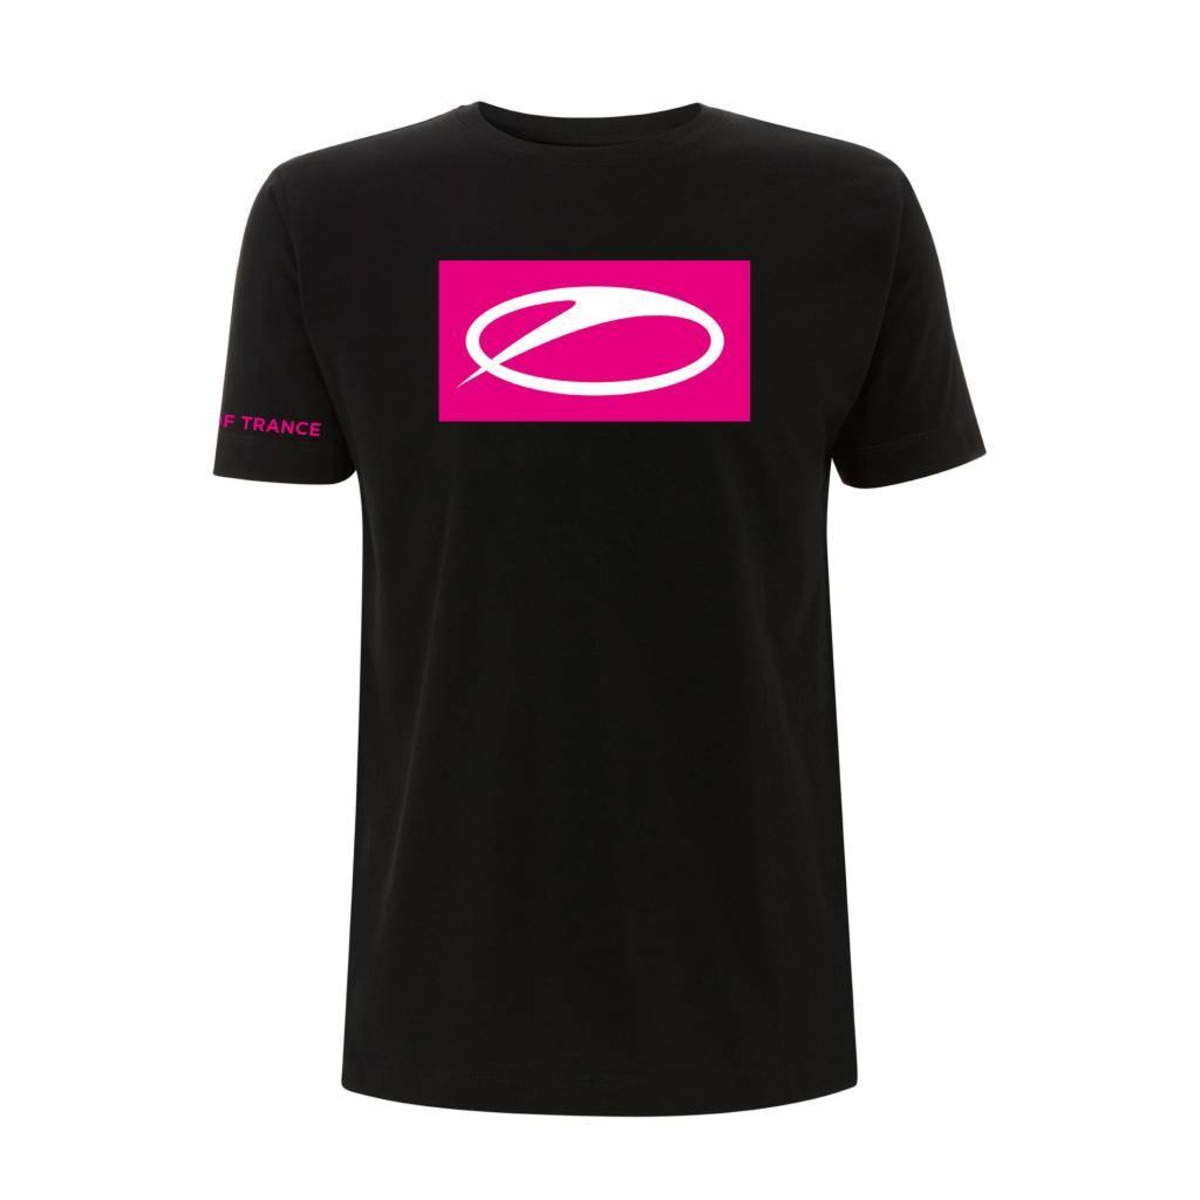 A STATE OF TRANCE 800 Tシャツ | ULTRA BOUTIQUE - ULTRA FASHION STORE | ULTRA  ファッションストアー